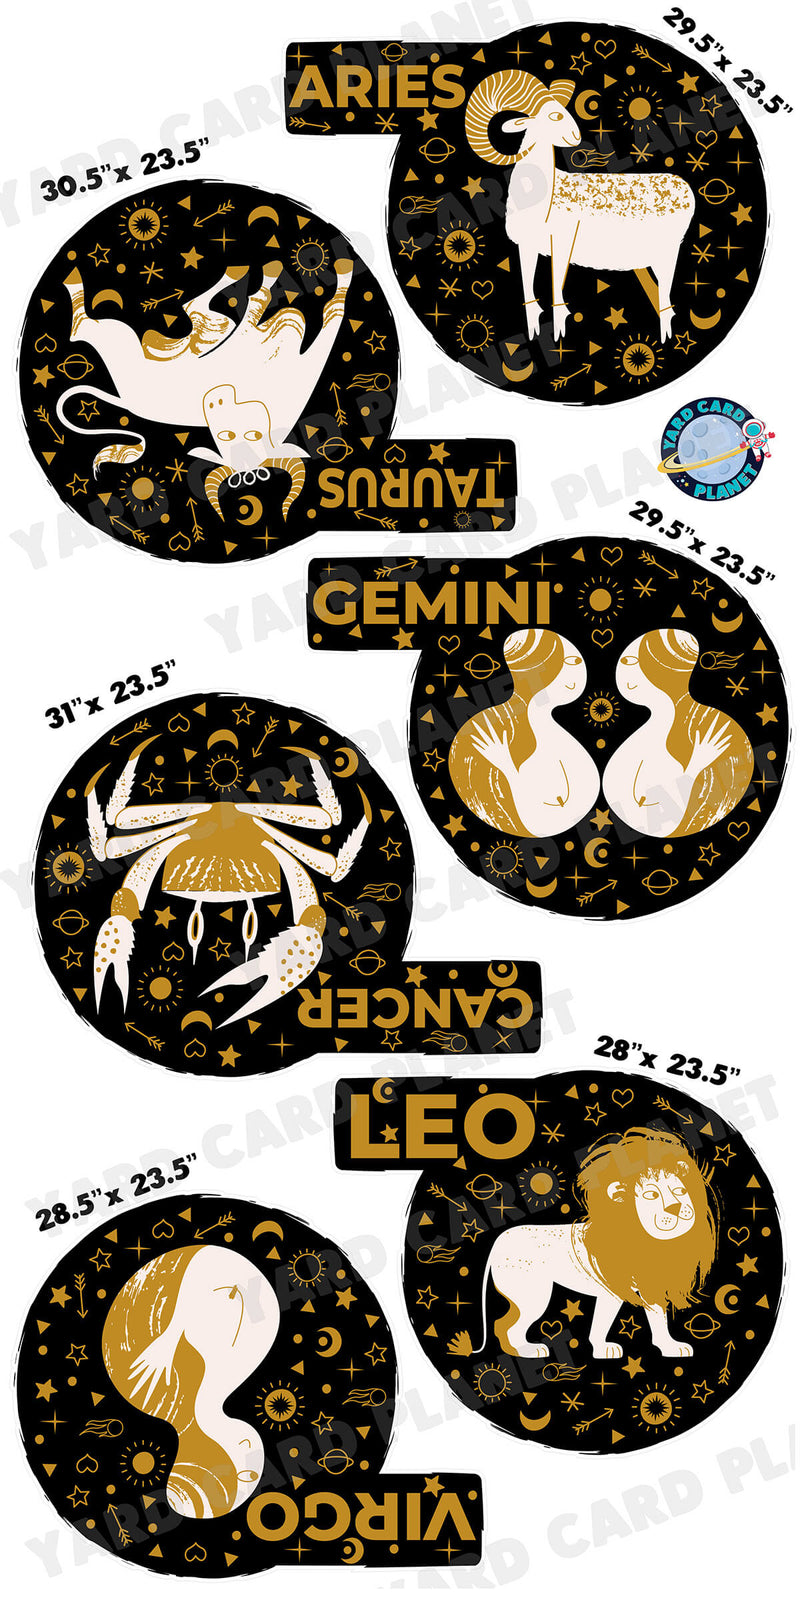 Eclectic Zodiac Signs Yard Card Flair Set - Part 1 with Measurements